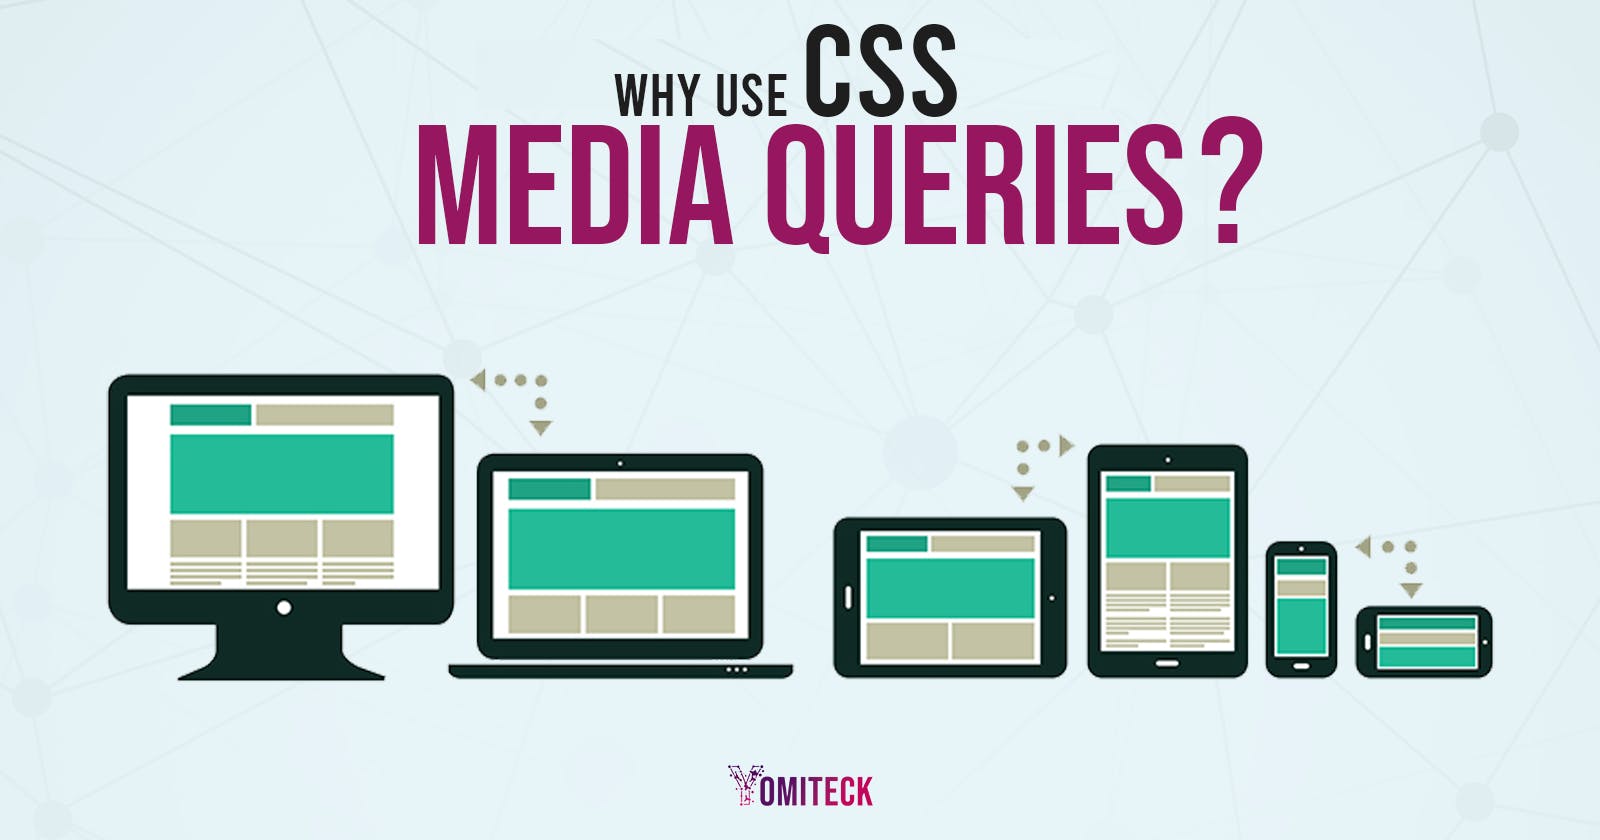 Why use CSS Media Queries?